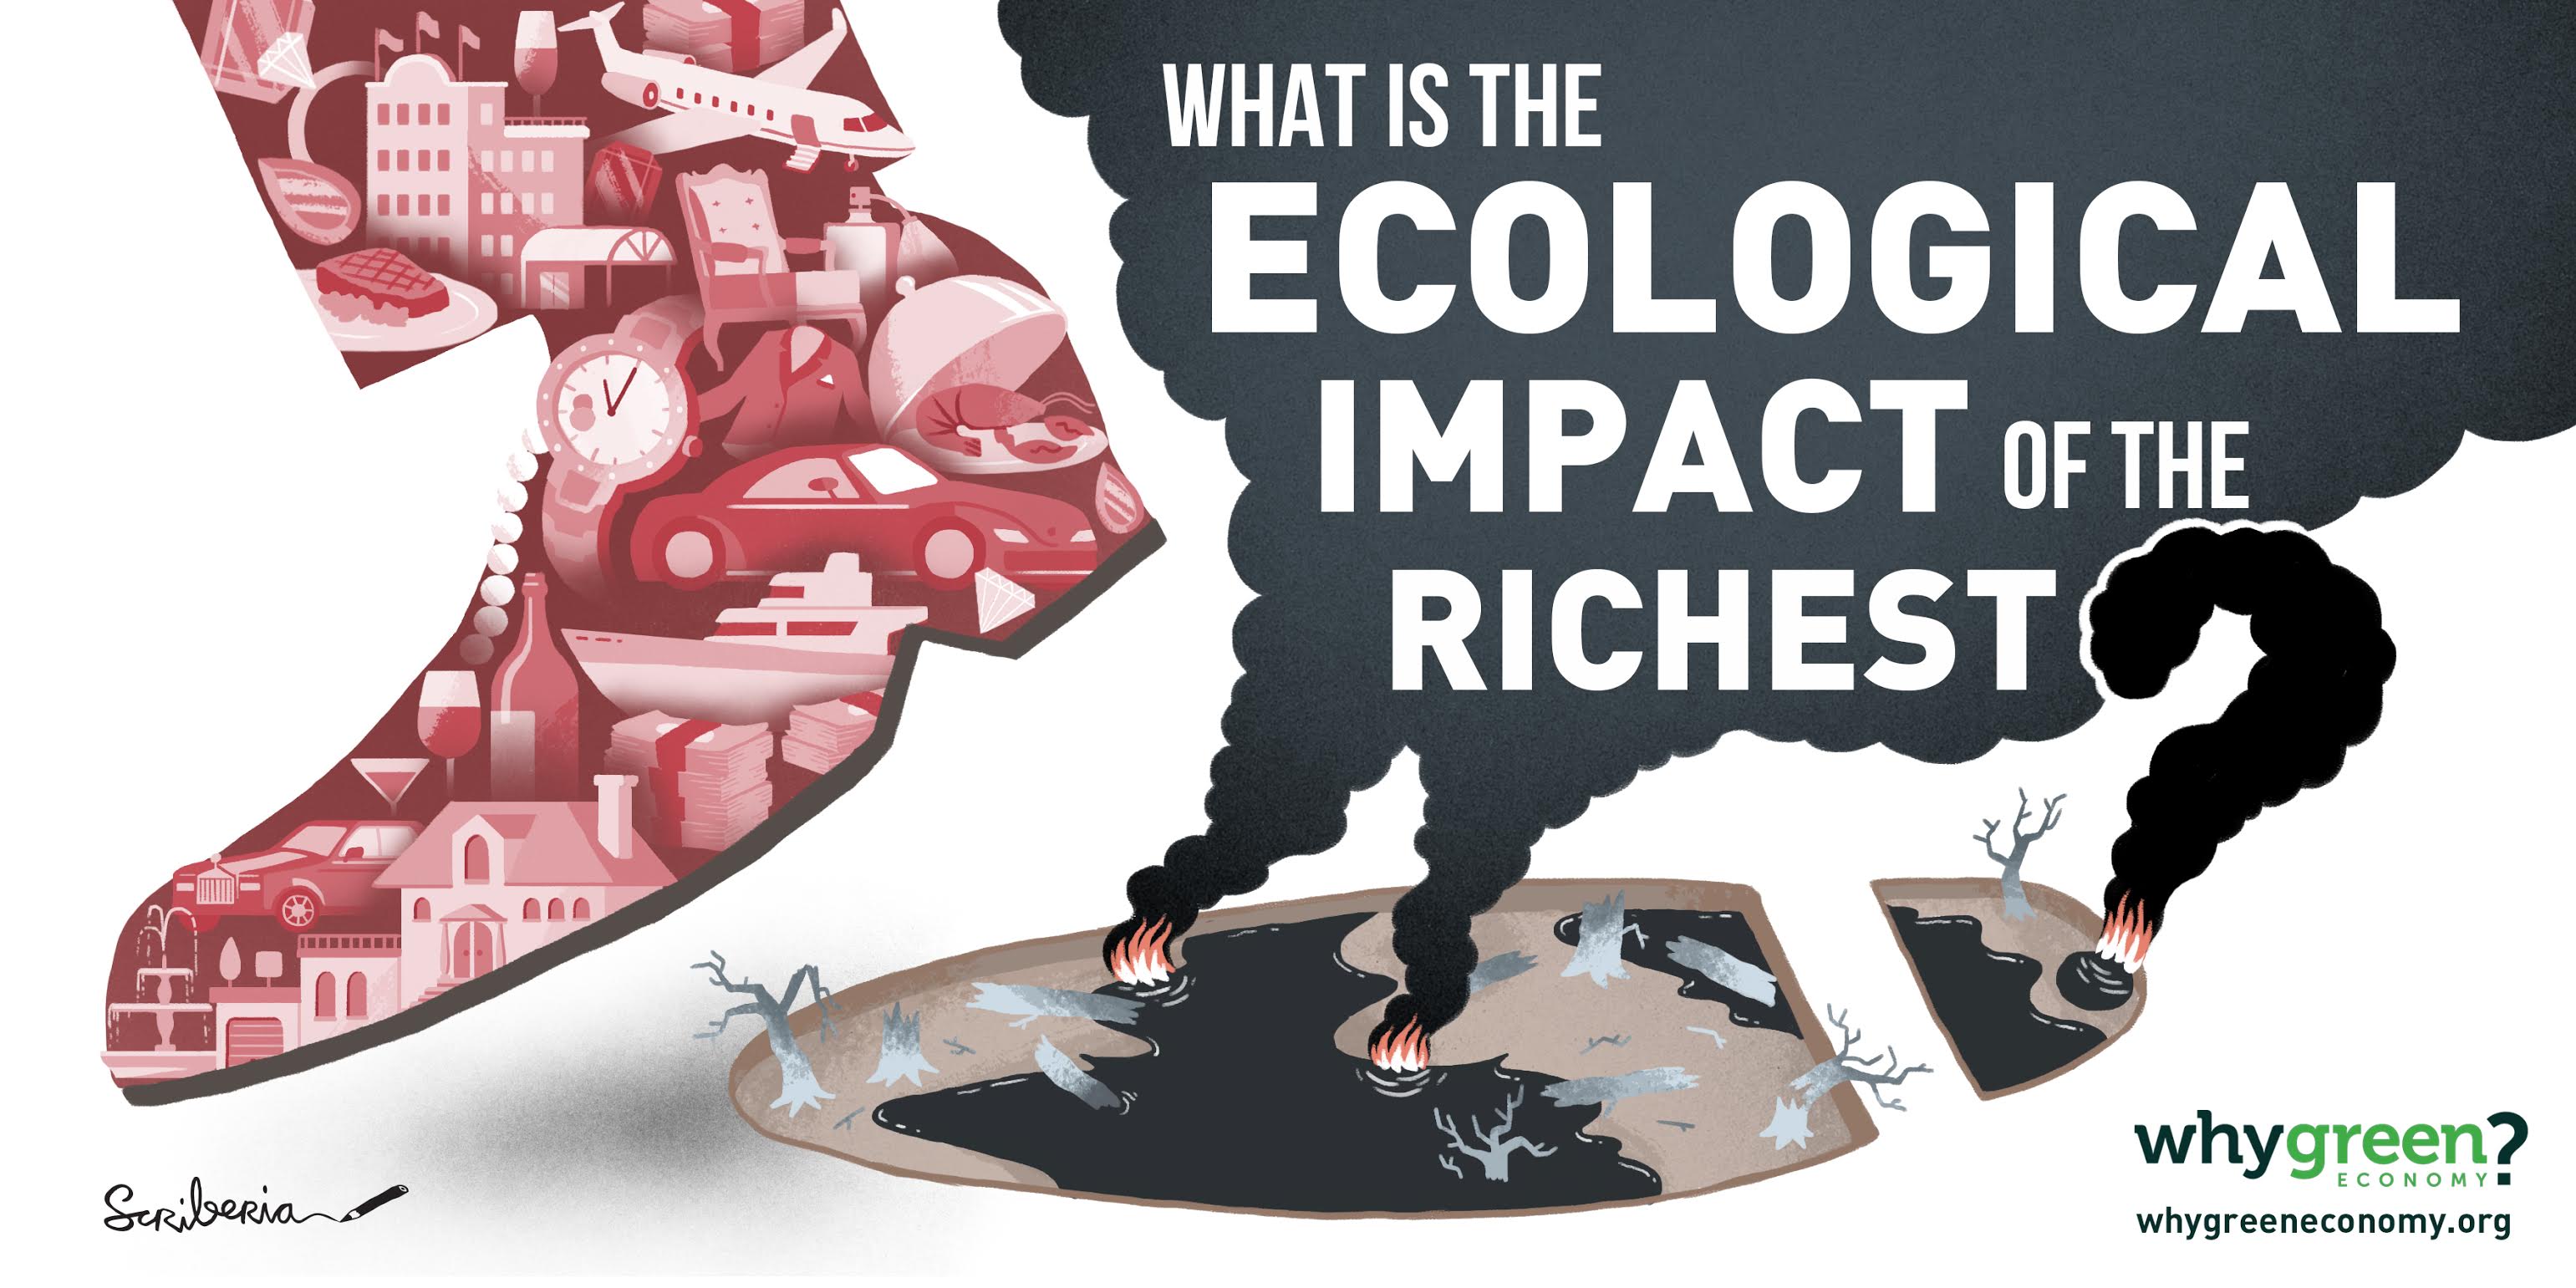 Why Green Economy?. Ecological footprint of the richest